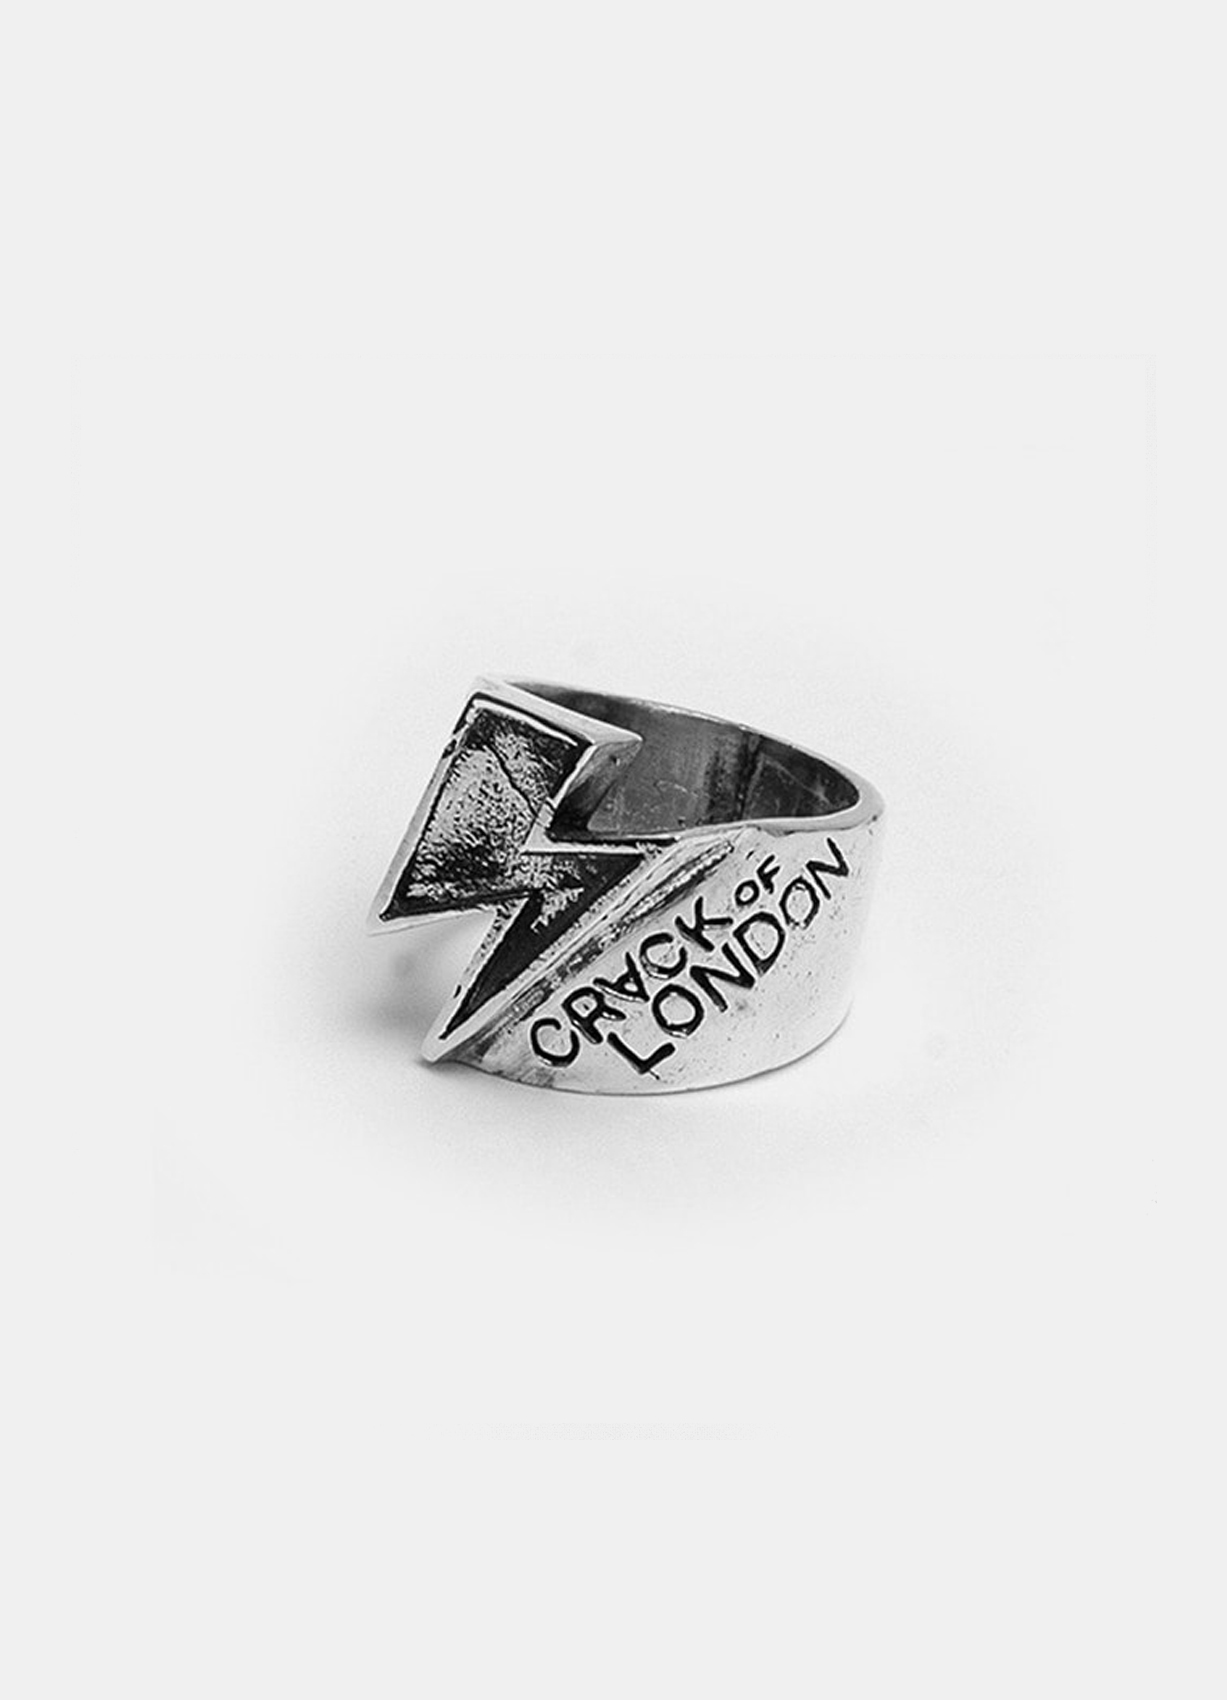 Crack Of London x Triplesix Collaboration Rings